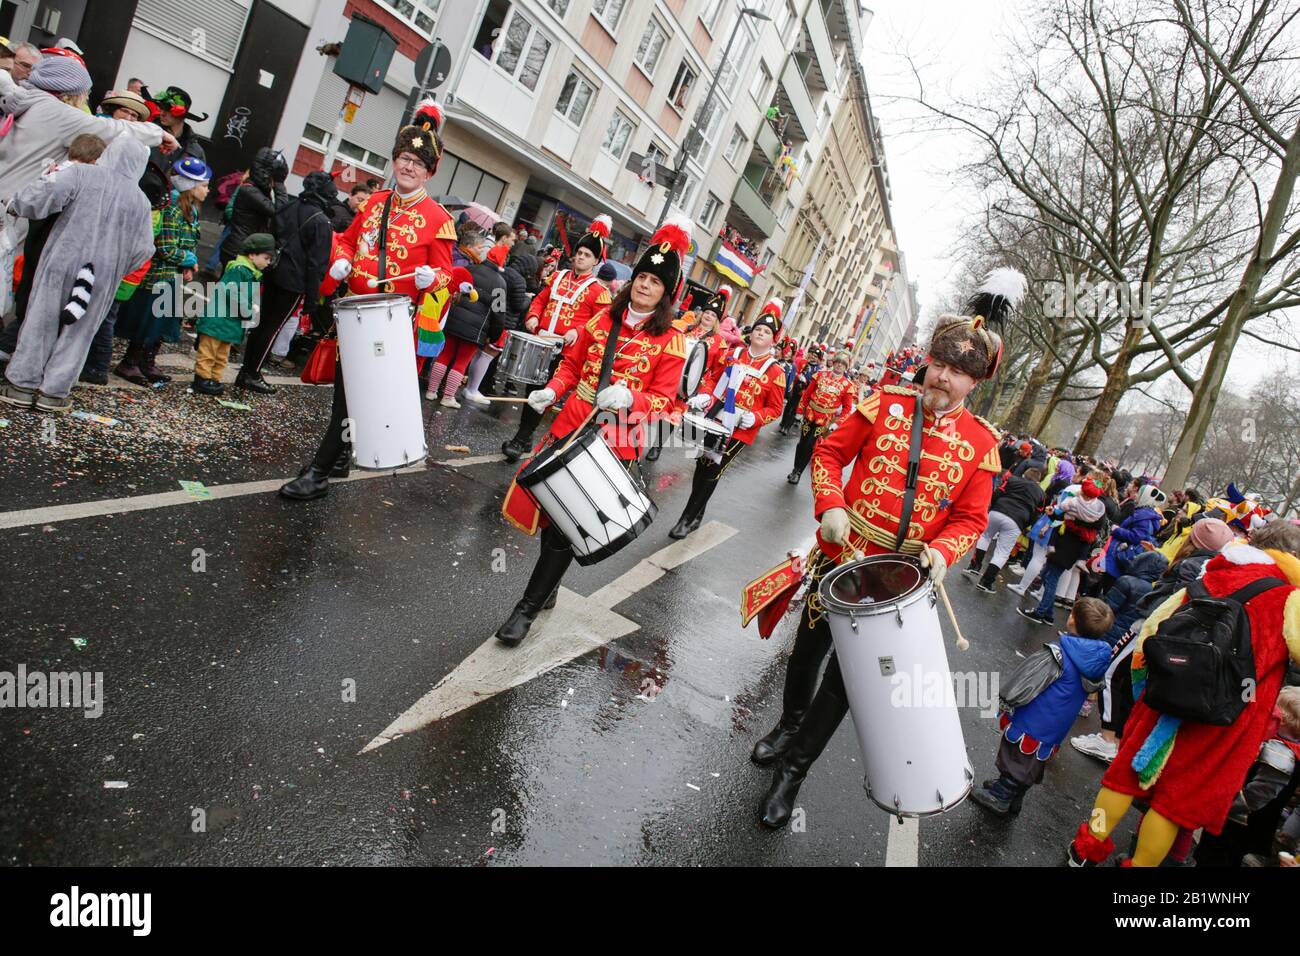 Mainz, Germany. 24th February 2020. Members of the marching band of the carnival guards C.C. Rote Husaren Mainz-Kostheim march in the Mainz Rose Monday parade. Around half a million people lined the streets of Mainz for the traditional Rose Monday Carnival Parade. The 9 km long parade with over 9,000 participants is one of the three large Rose Monday Parades in Germany. Stock Photo